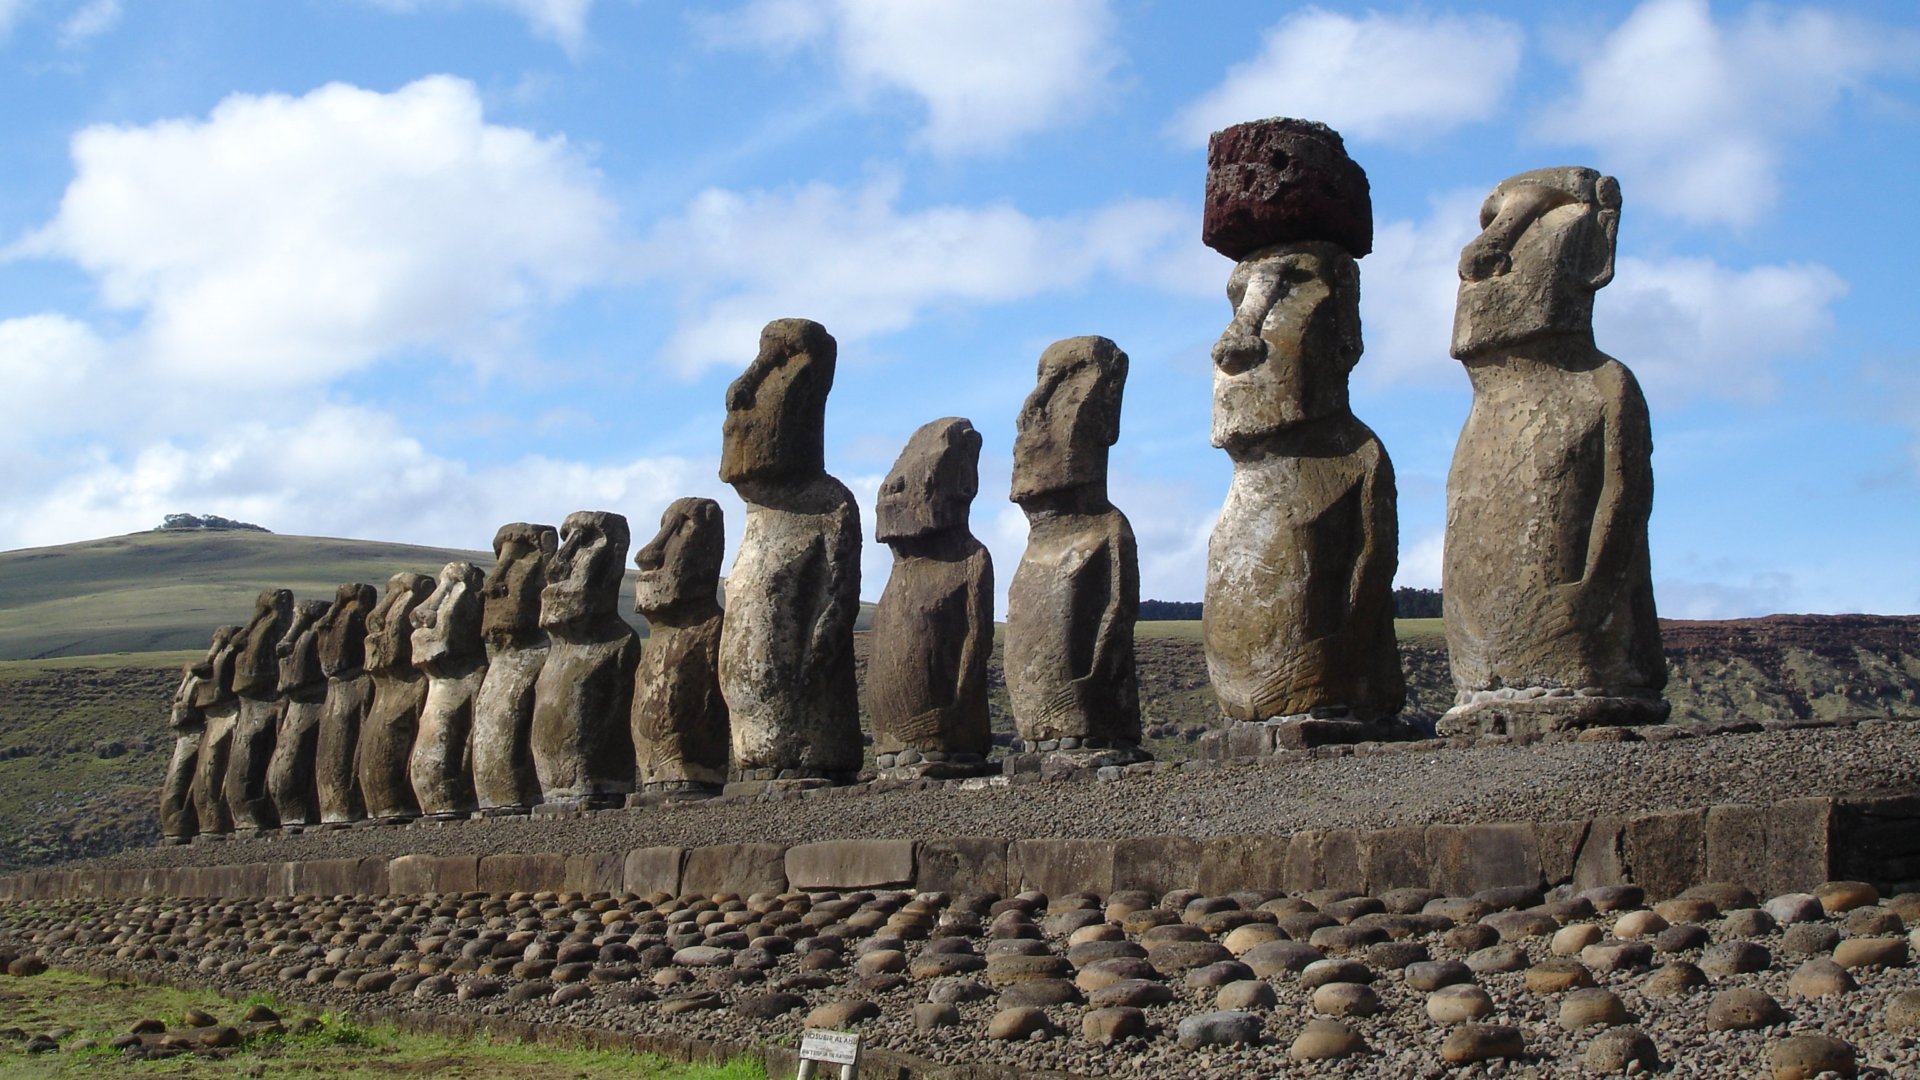 1722: Europeans Discover Easter Island (Rapa Nui) and its Monumental Statues